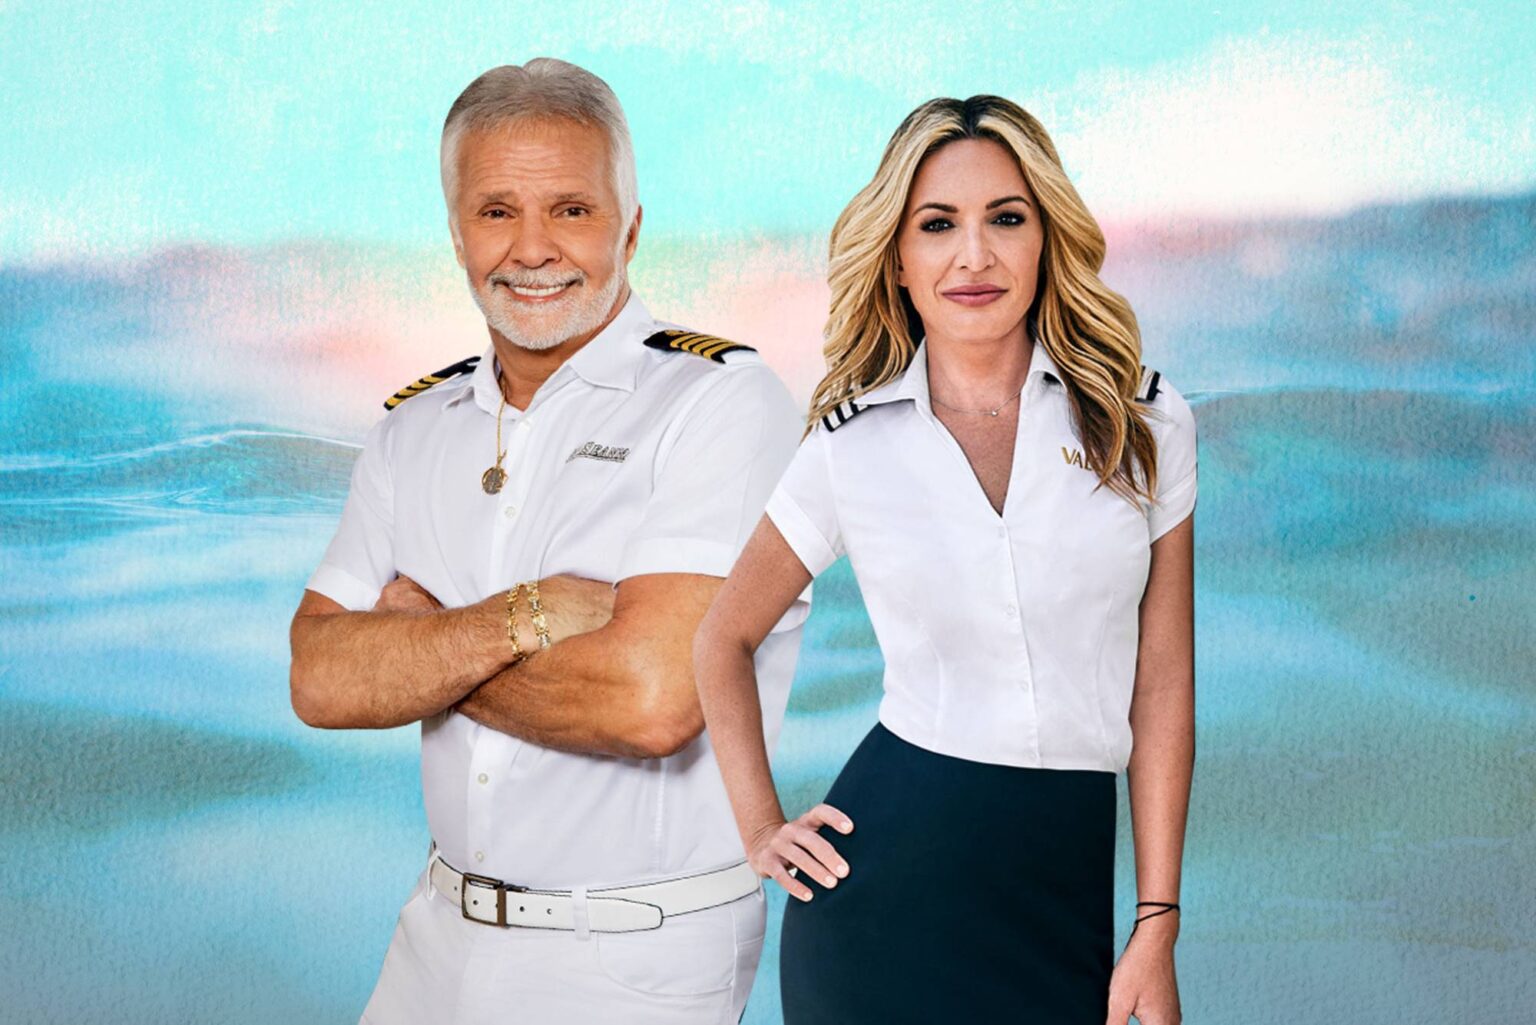 ‘Below Deck’ dishes out tons of cast drama. How much of the Bravo series is faked and how much is real?